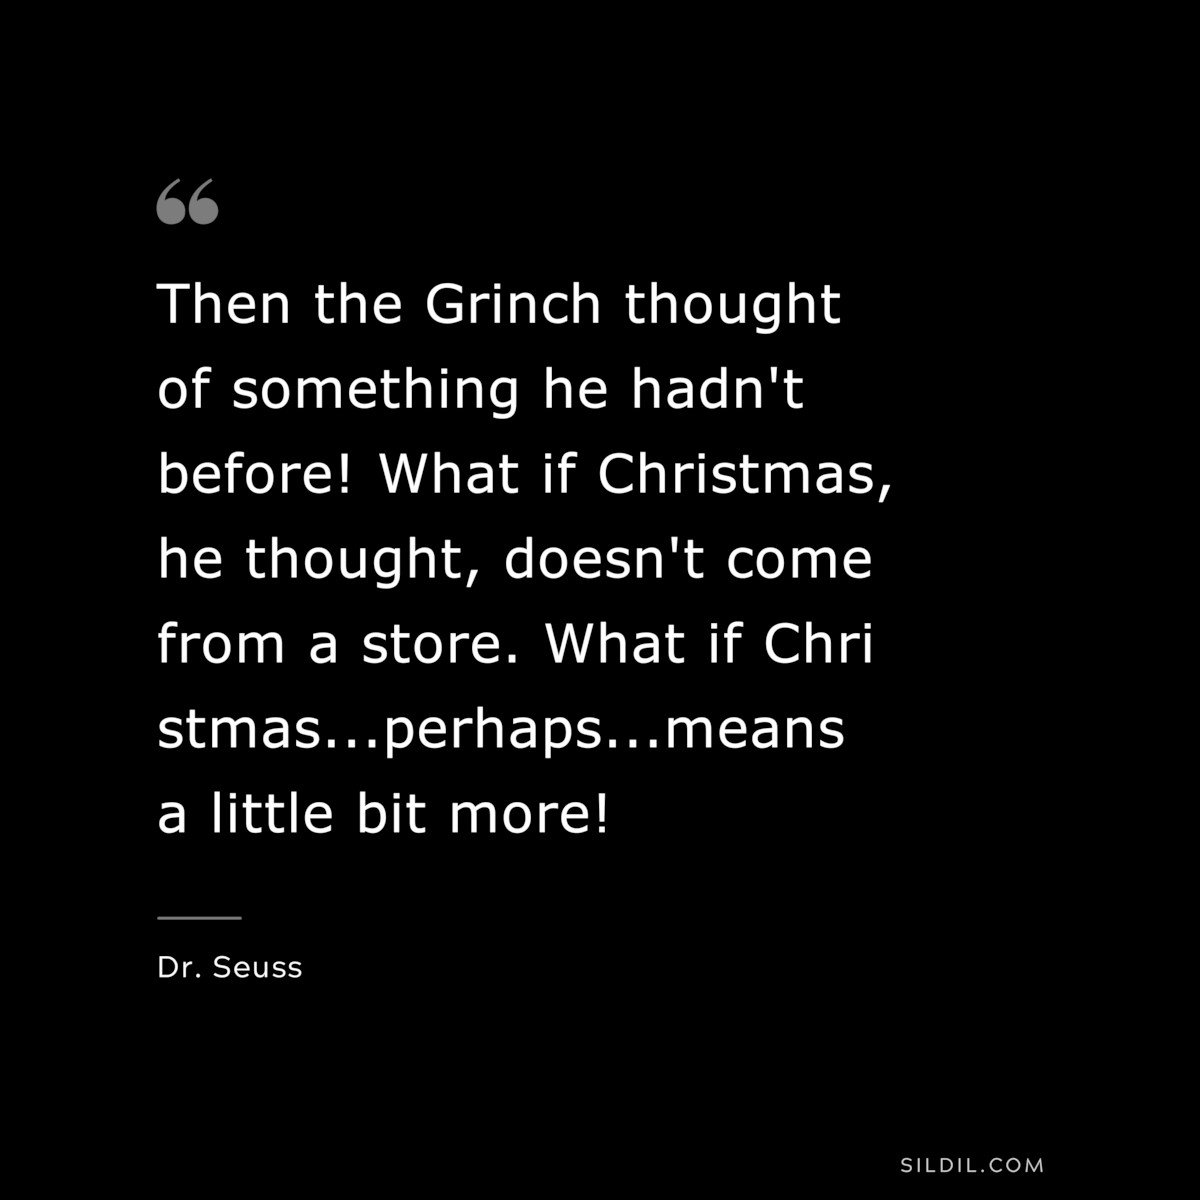 Then the Grinch thought of something he hadn't before! What if Christmas, he thought, doesn't come from a store. What if Christmas...perhaps...means a little bit more! ― Dr. Seuss